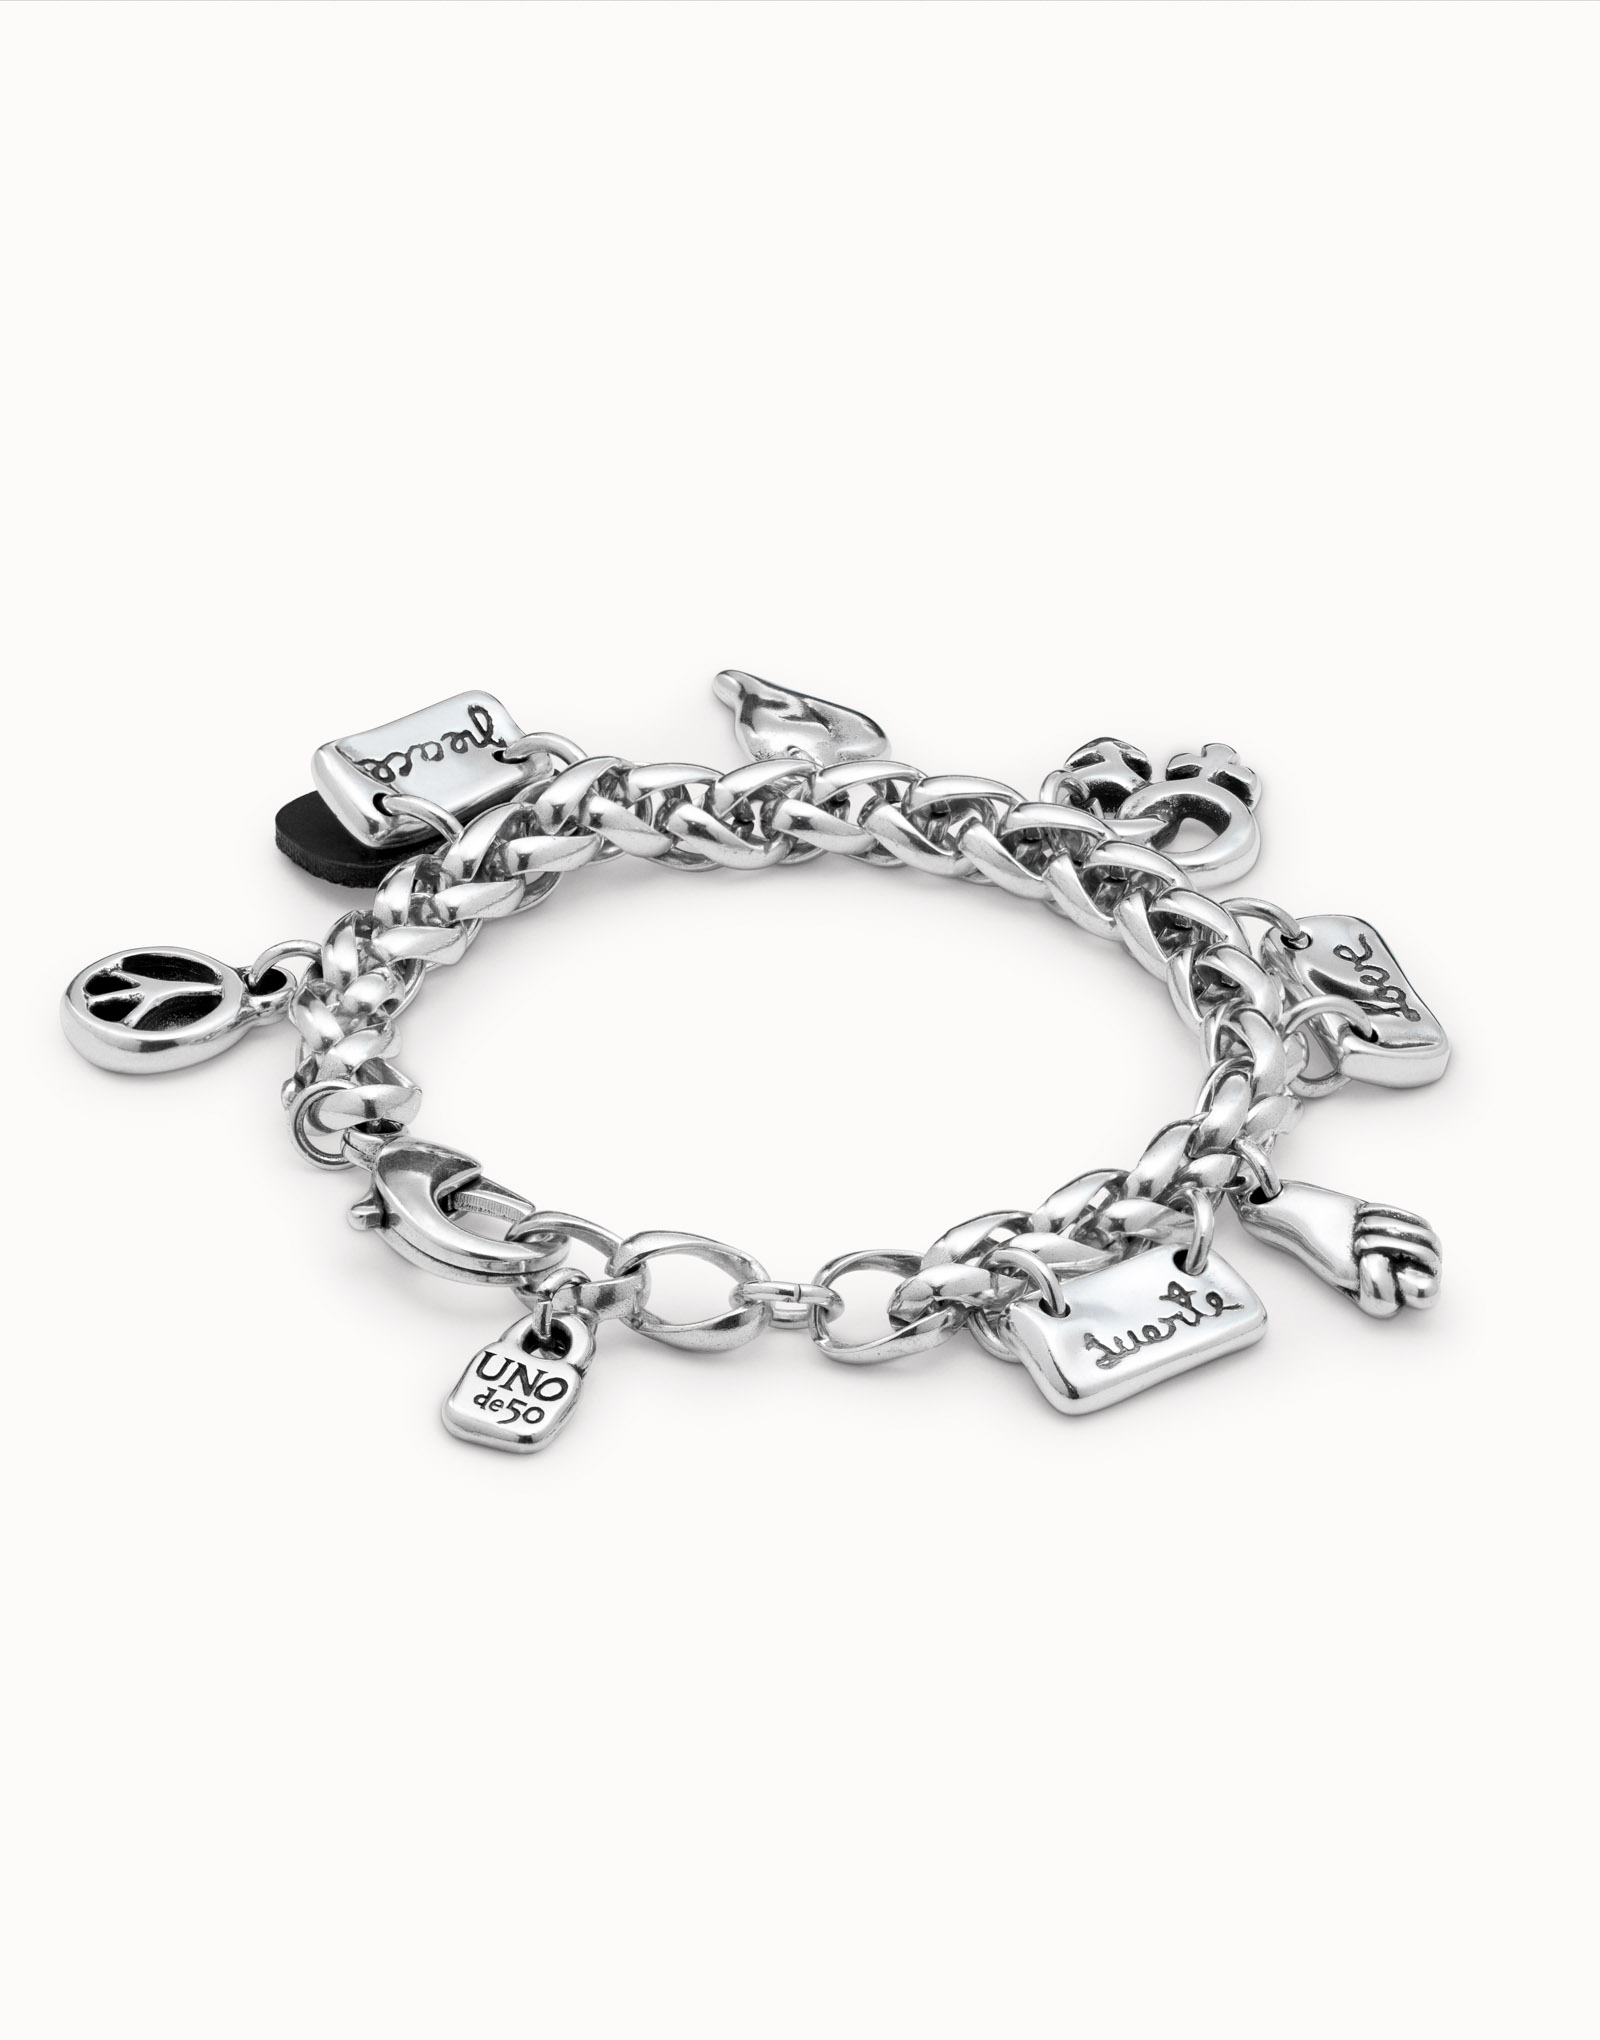 Sterling silver-plated bracelet with thick chain and several charms ...